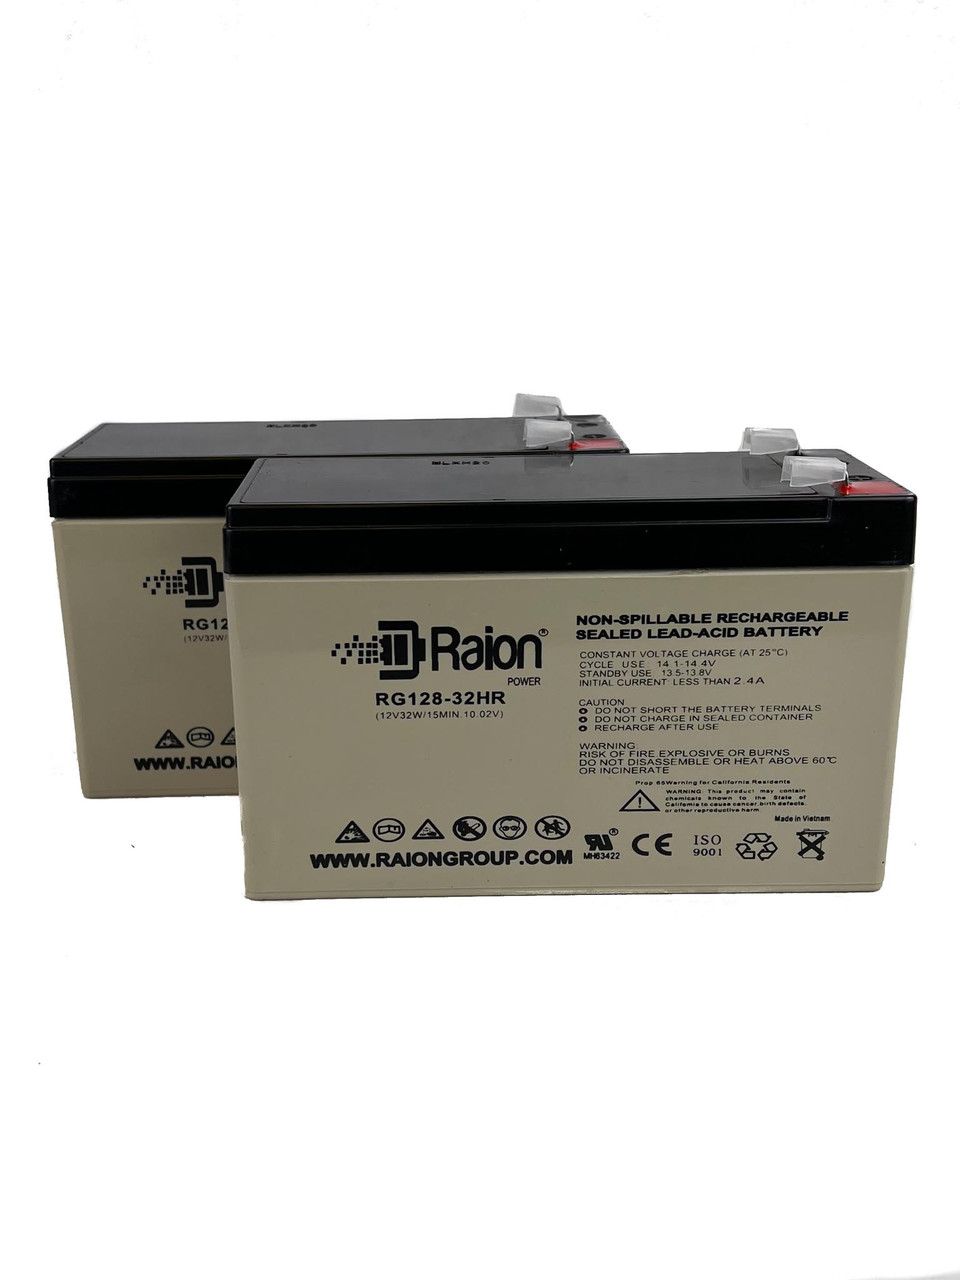 Raion Power 12V 7.5Ah High Rate Discharge UPS Batteries for Alpha Technologies ALI Plus 800 (017-737-12) - 2 Pack